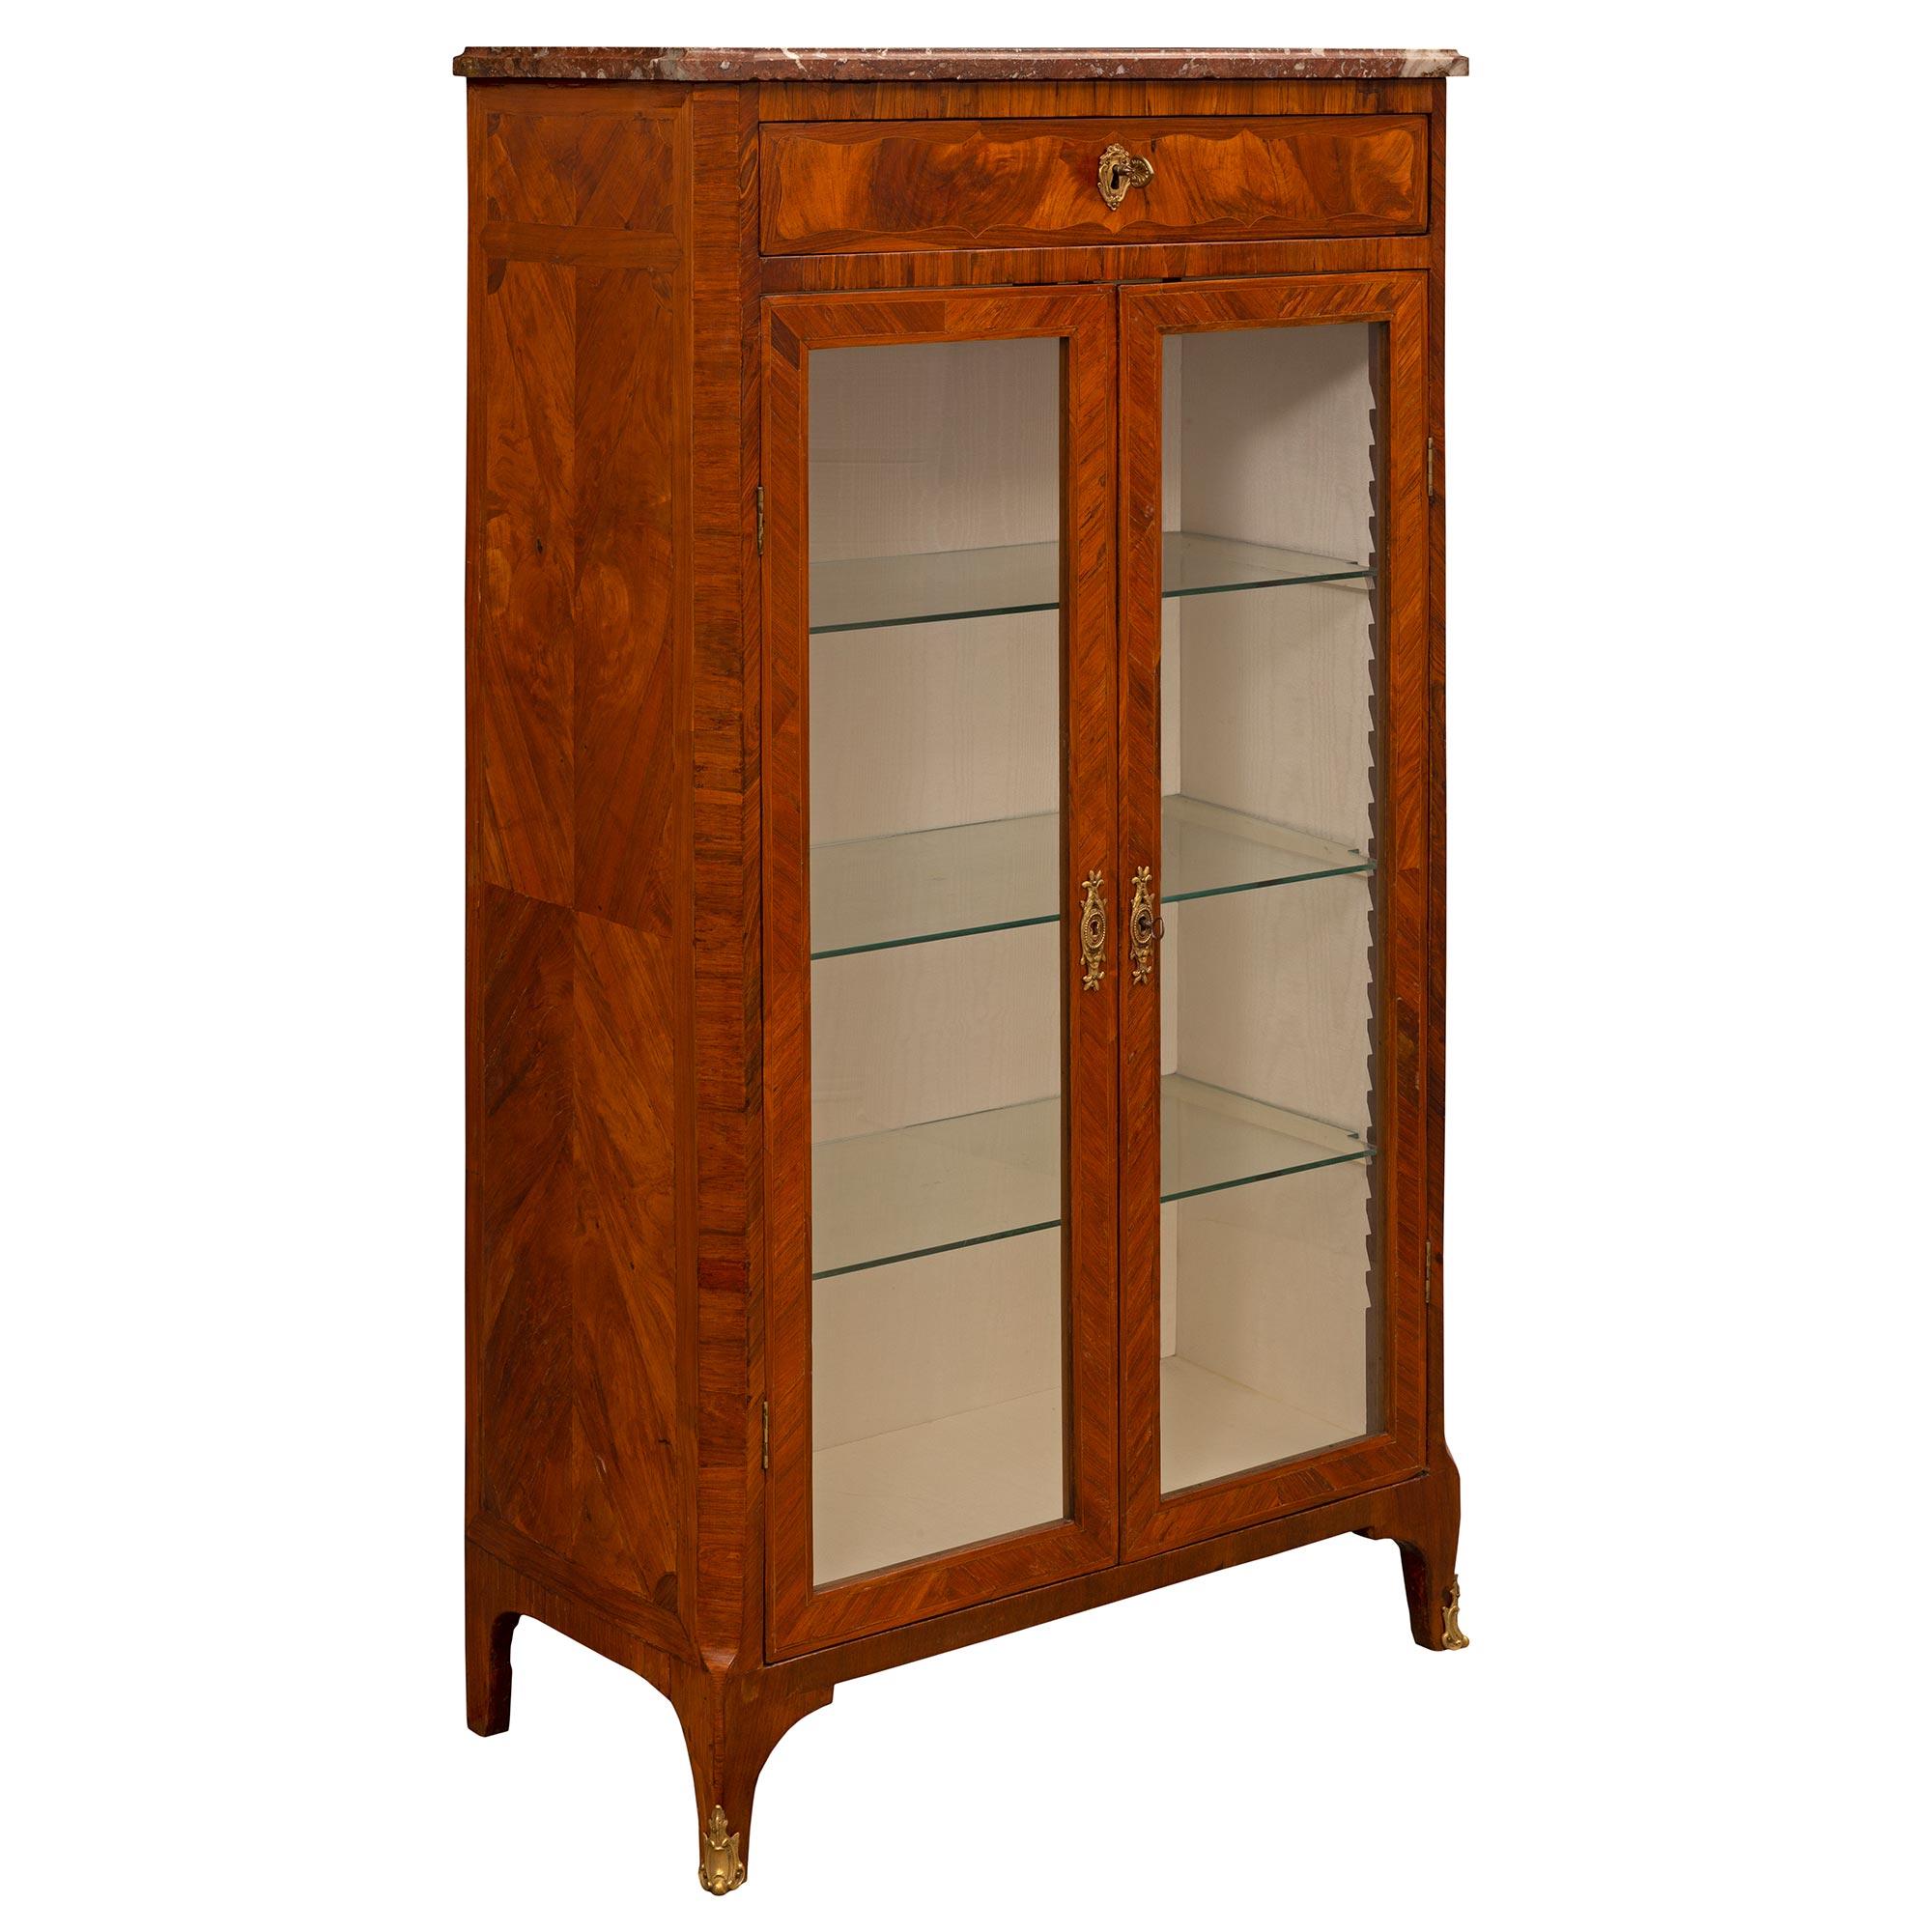 French 18th Century Louis XVI Period Rosewood Quarter Veneered Vitrine In Good Condition For Sale In West Palm Beach, FL